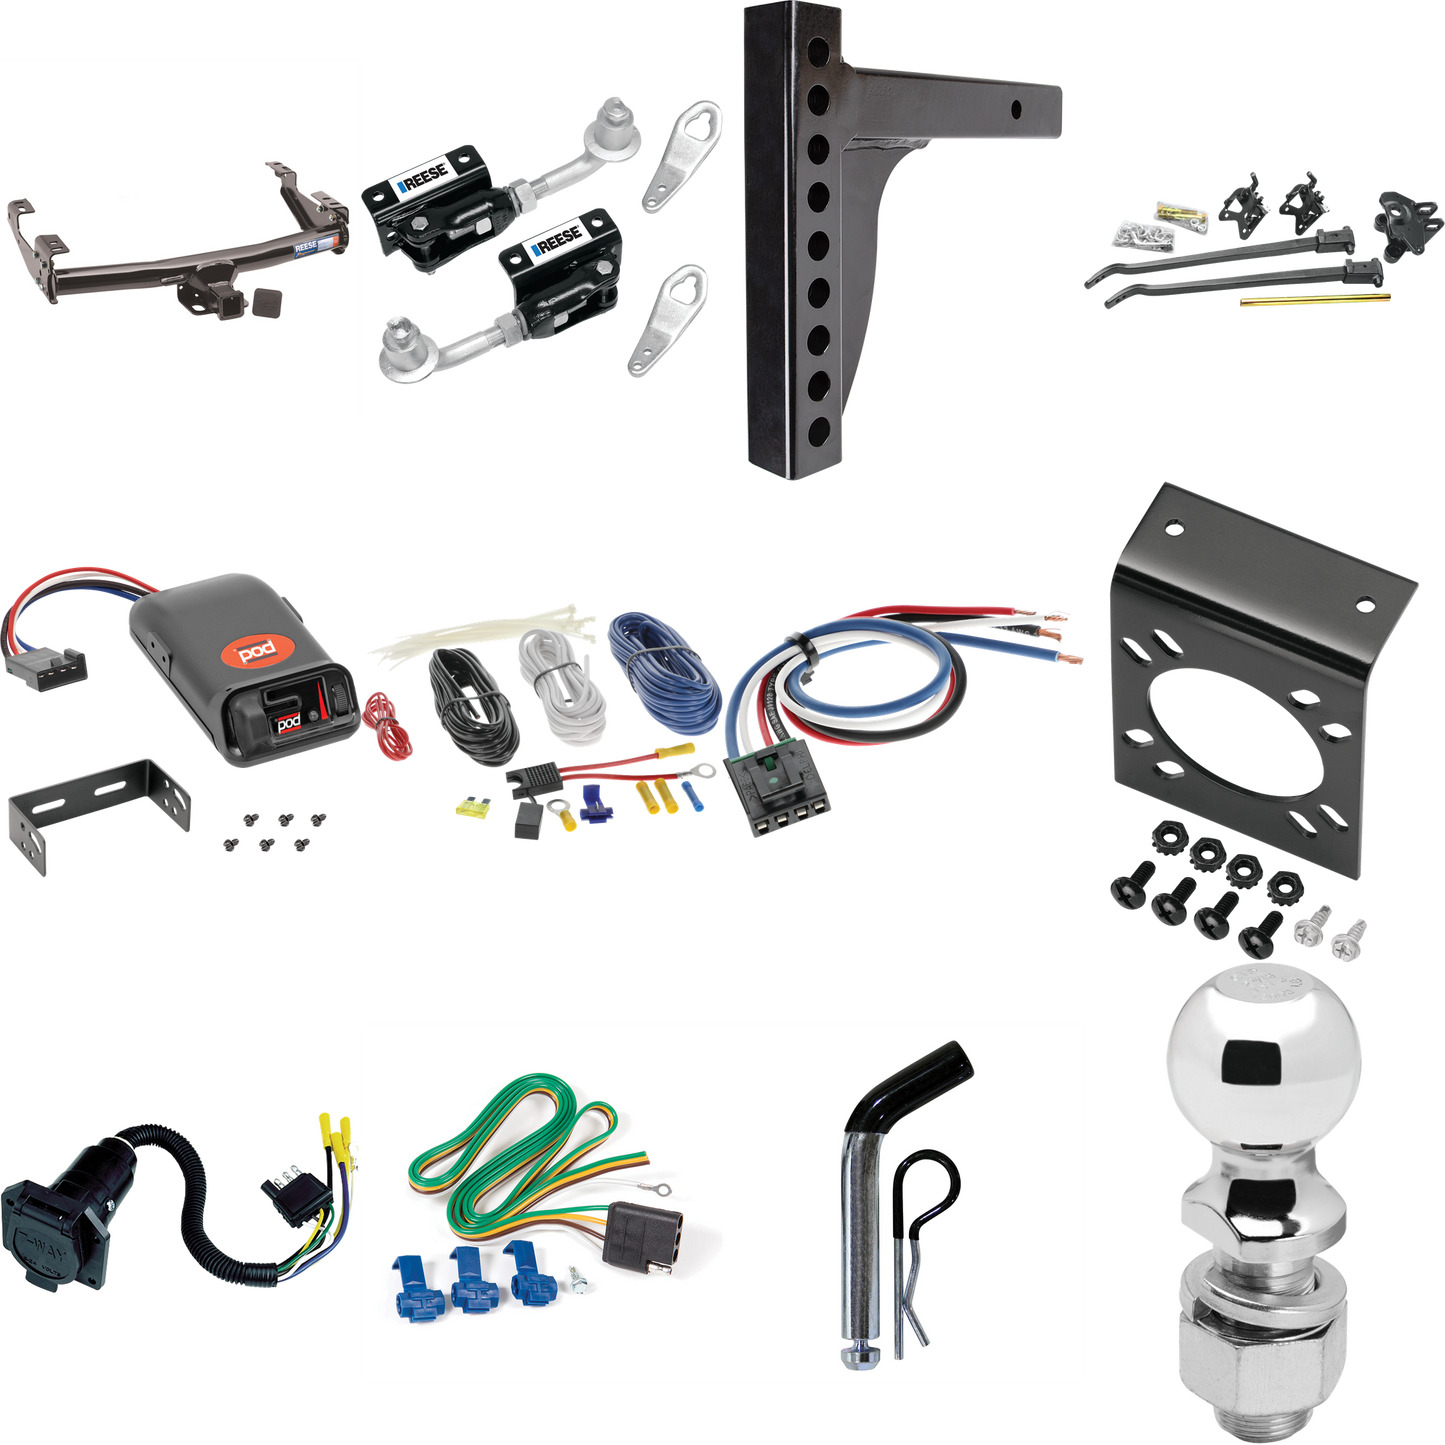 Fits 1971-1993 Dodge D250 Trailer Hitch Tow PKG w/ 12K Trunnion Bar Weight Distribution Hitch + Pin/Clip + Dual Cam Sway Control + 2-5/16" Ball + Pro Series POD Brake Control + Generic BC Wiring Adapter + 7-Way RV Wiring By Reese Towpower